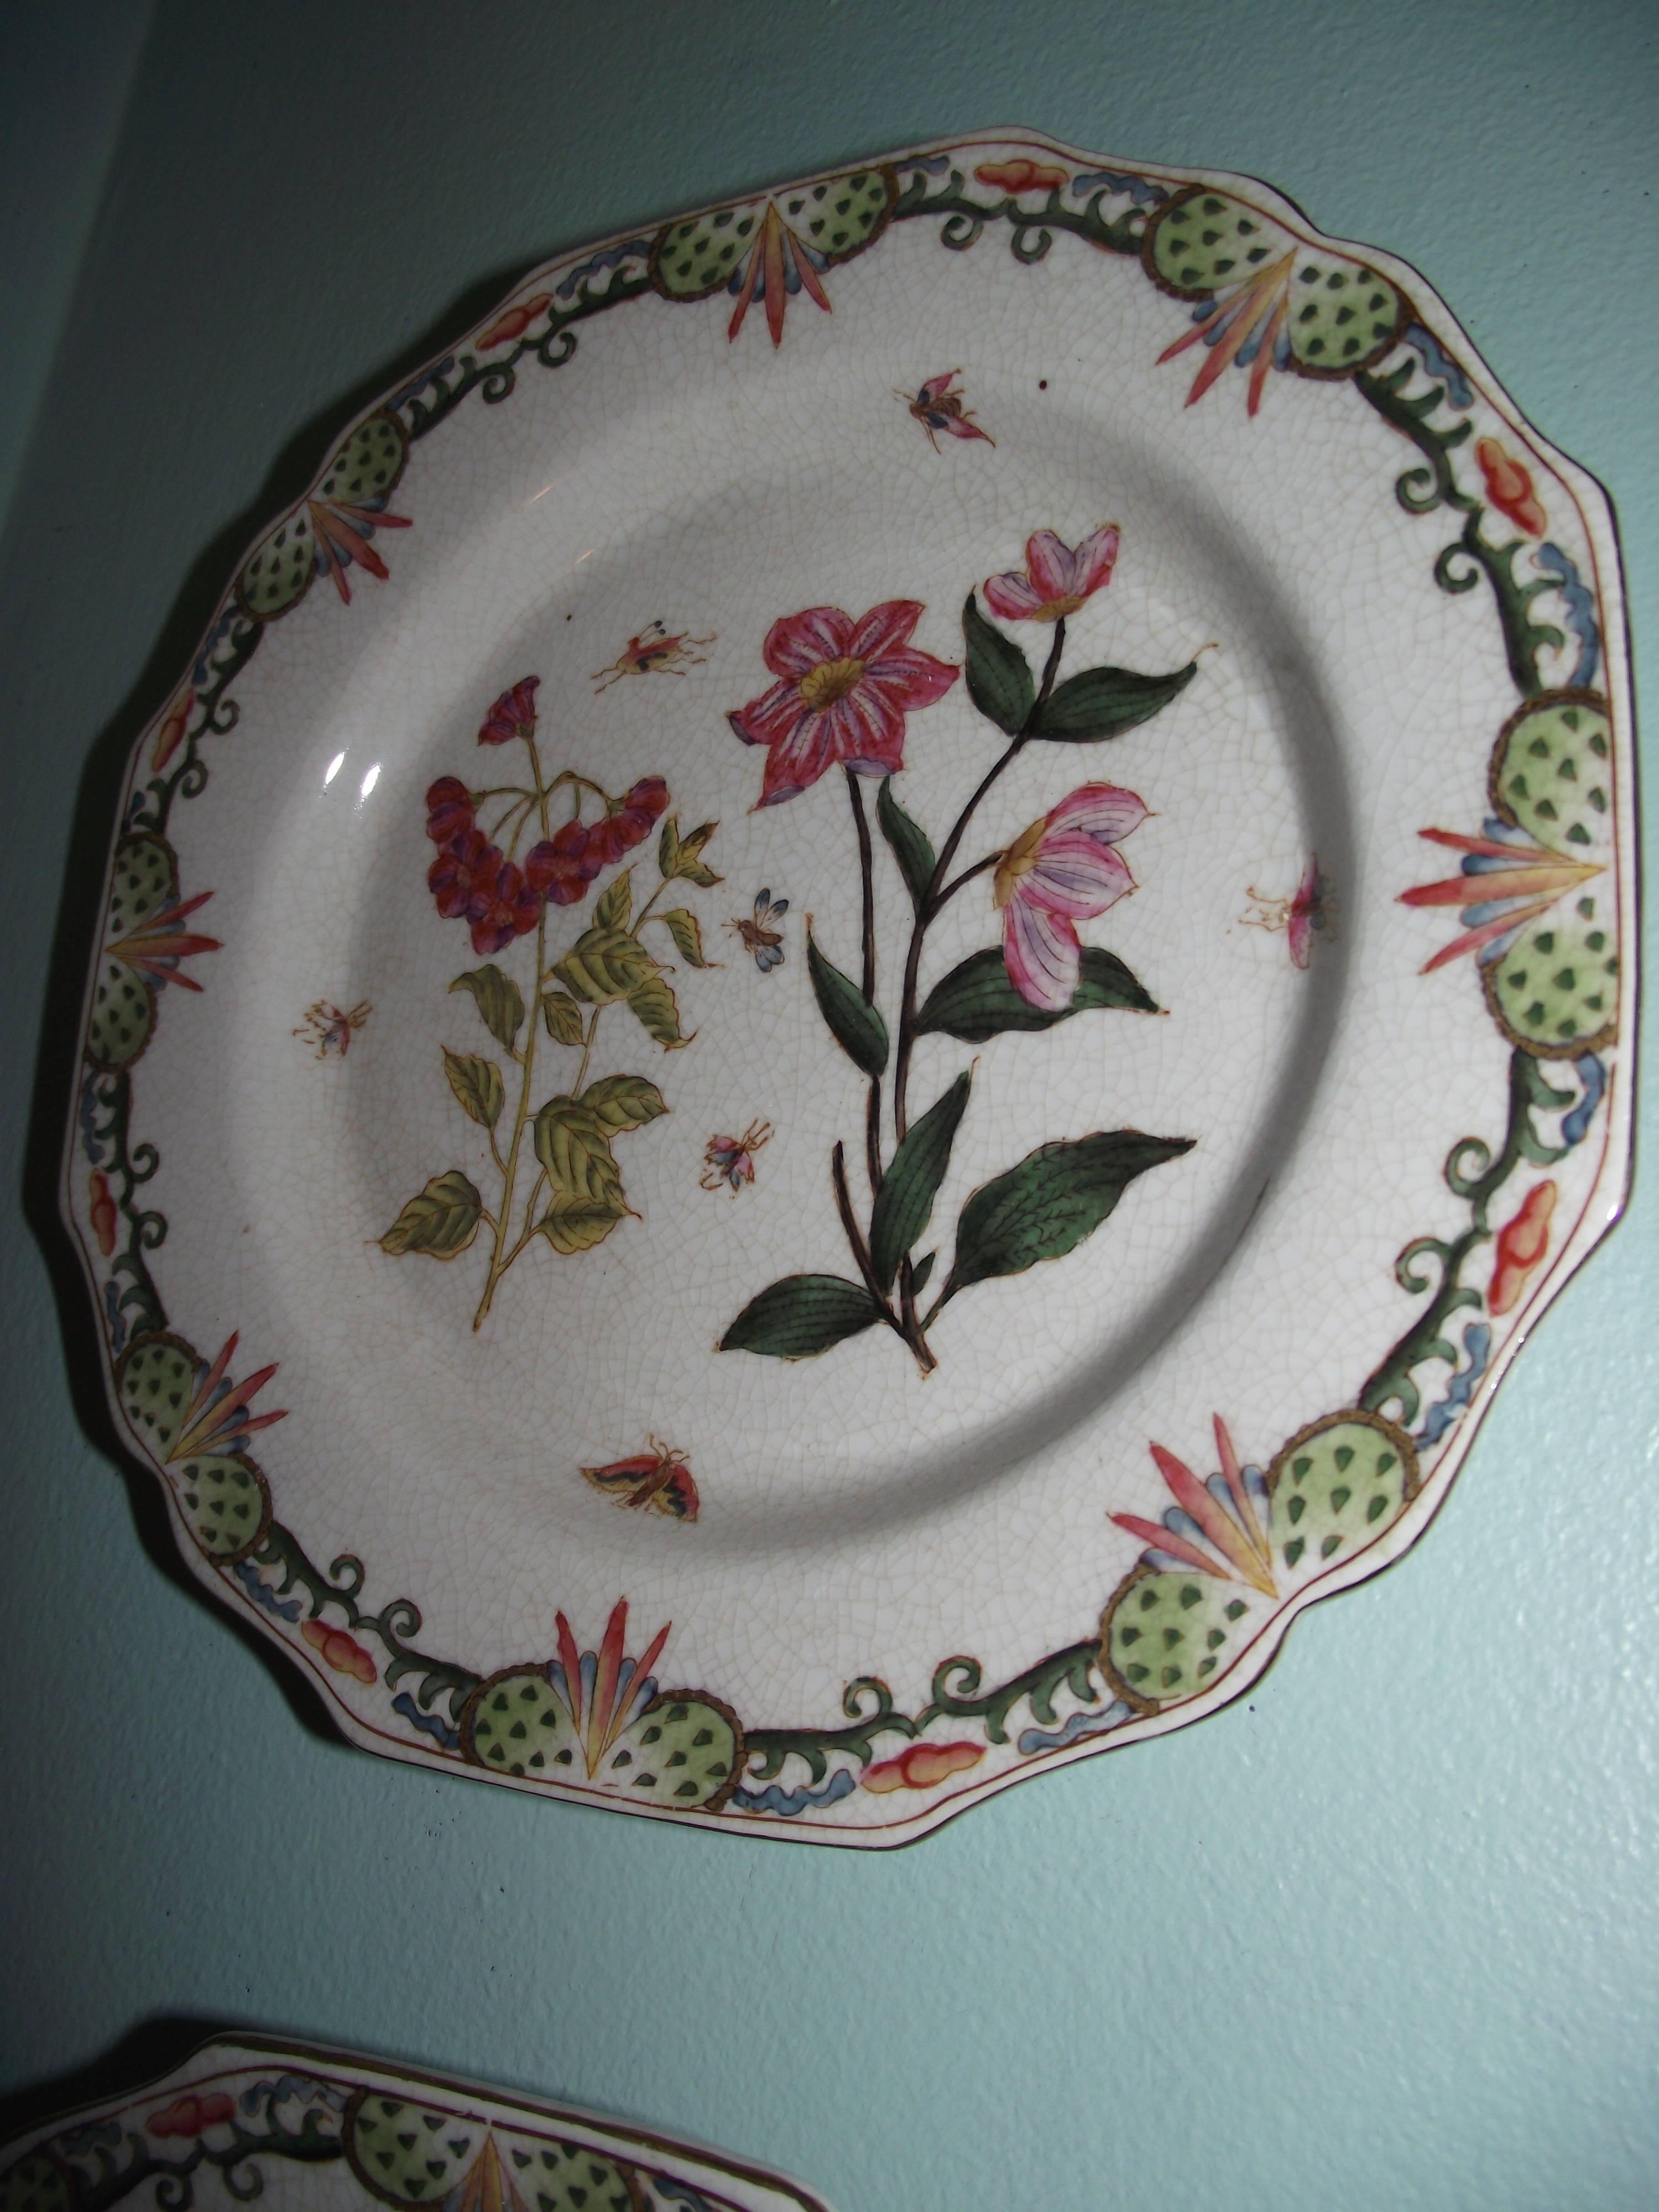 Decorative Plates, Set of Five Transferware Plates In Excellent Condition For Sale In Harrisburg, PA